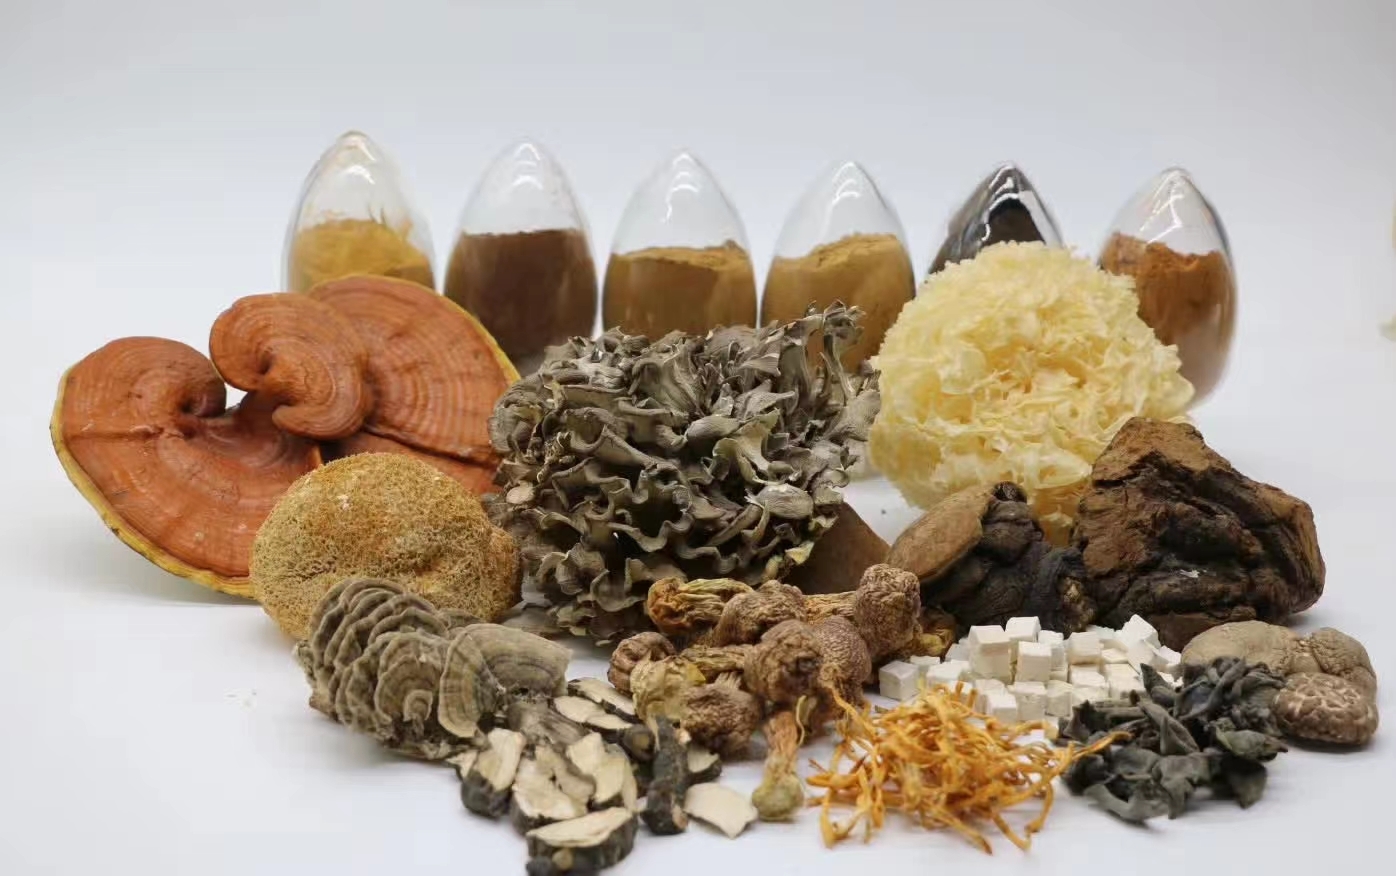 MIGU Adaptogen Bio-tech Co., Ltd. Unveils Superior Quality Fungus Extract Powder Using Selected High-Quality Ingredients